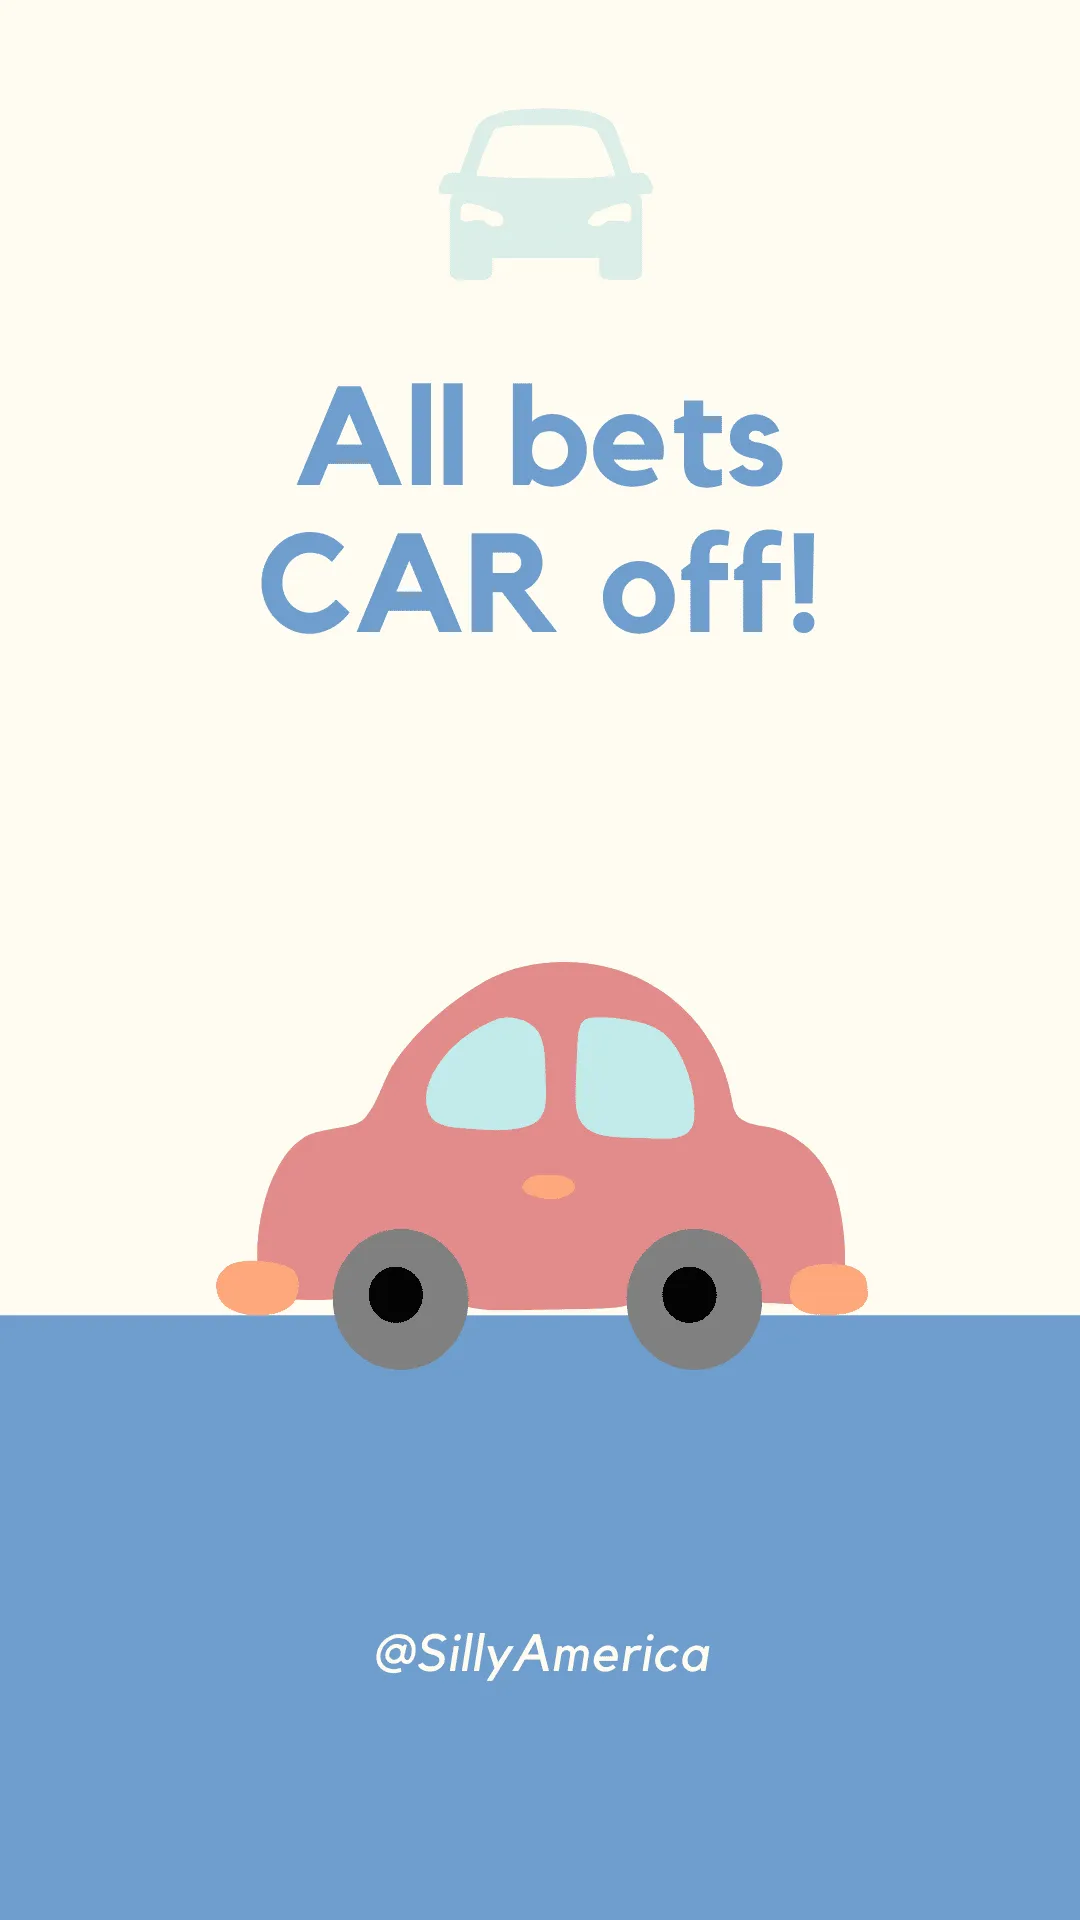 All bets CAR off! - Car Puns to fuel your road trip content!